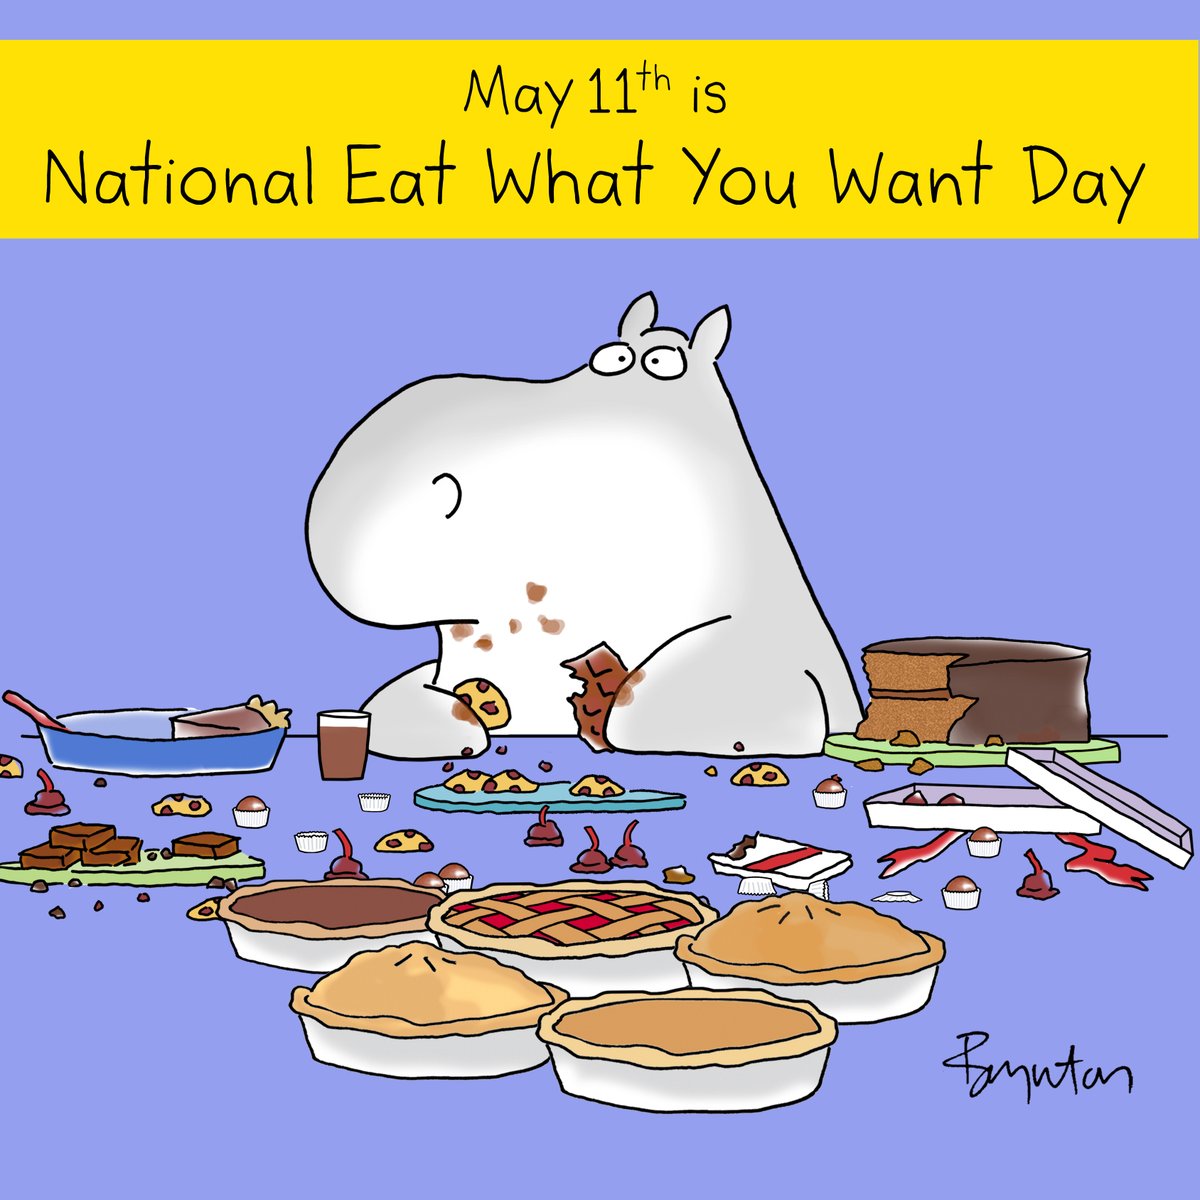 OH NO! How did I miss this?! Okay: steady. Focus. It's still not midnight... #EatWhatYouWantDay